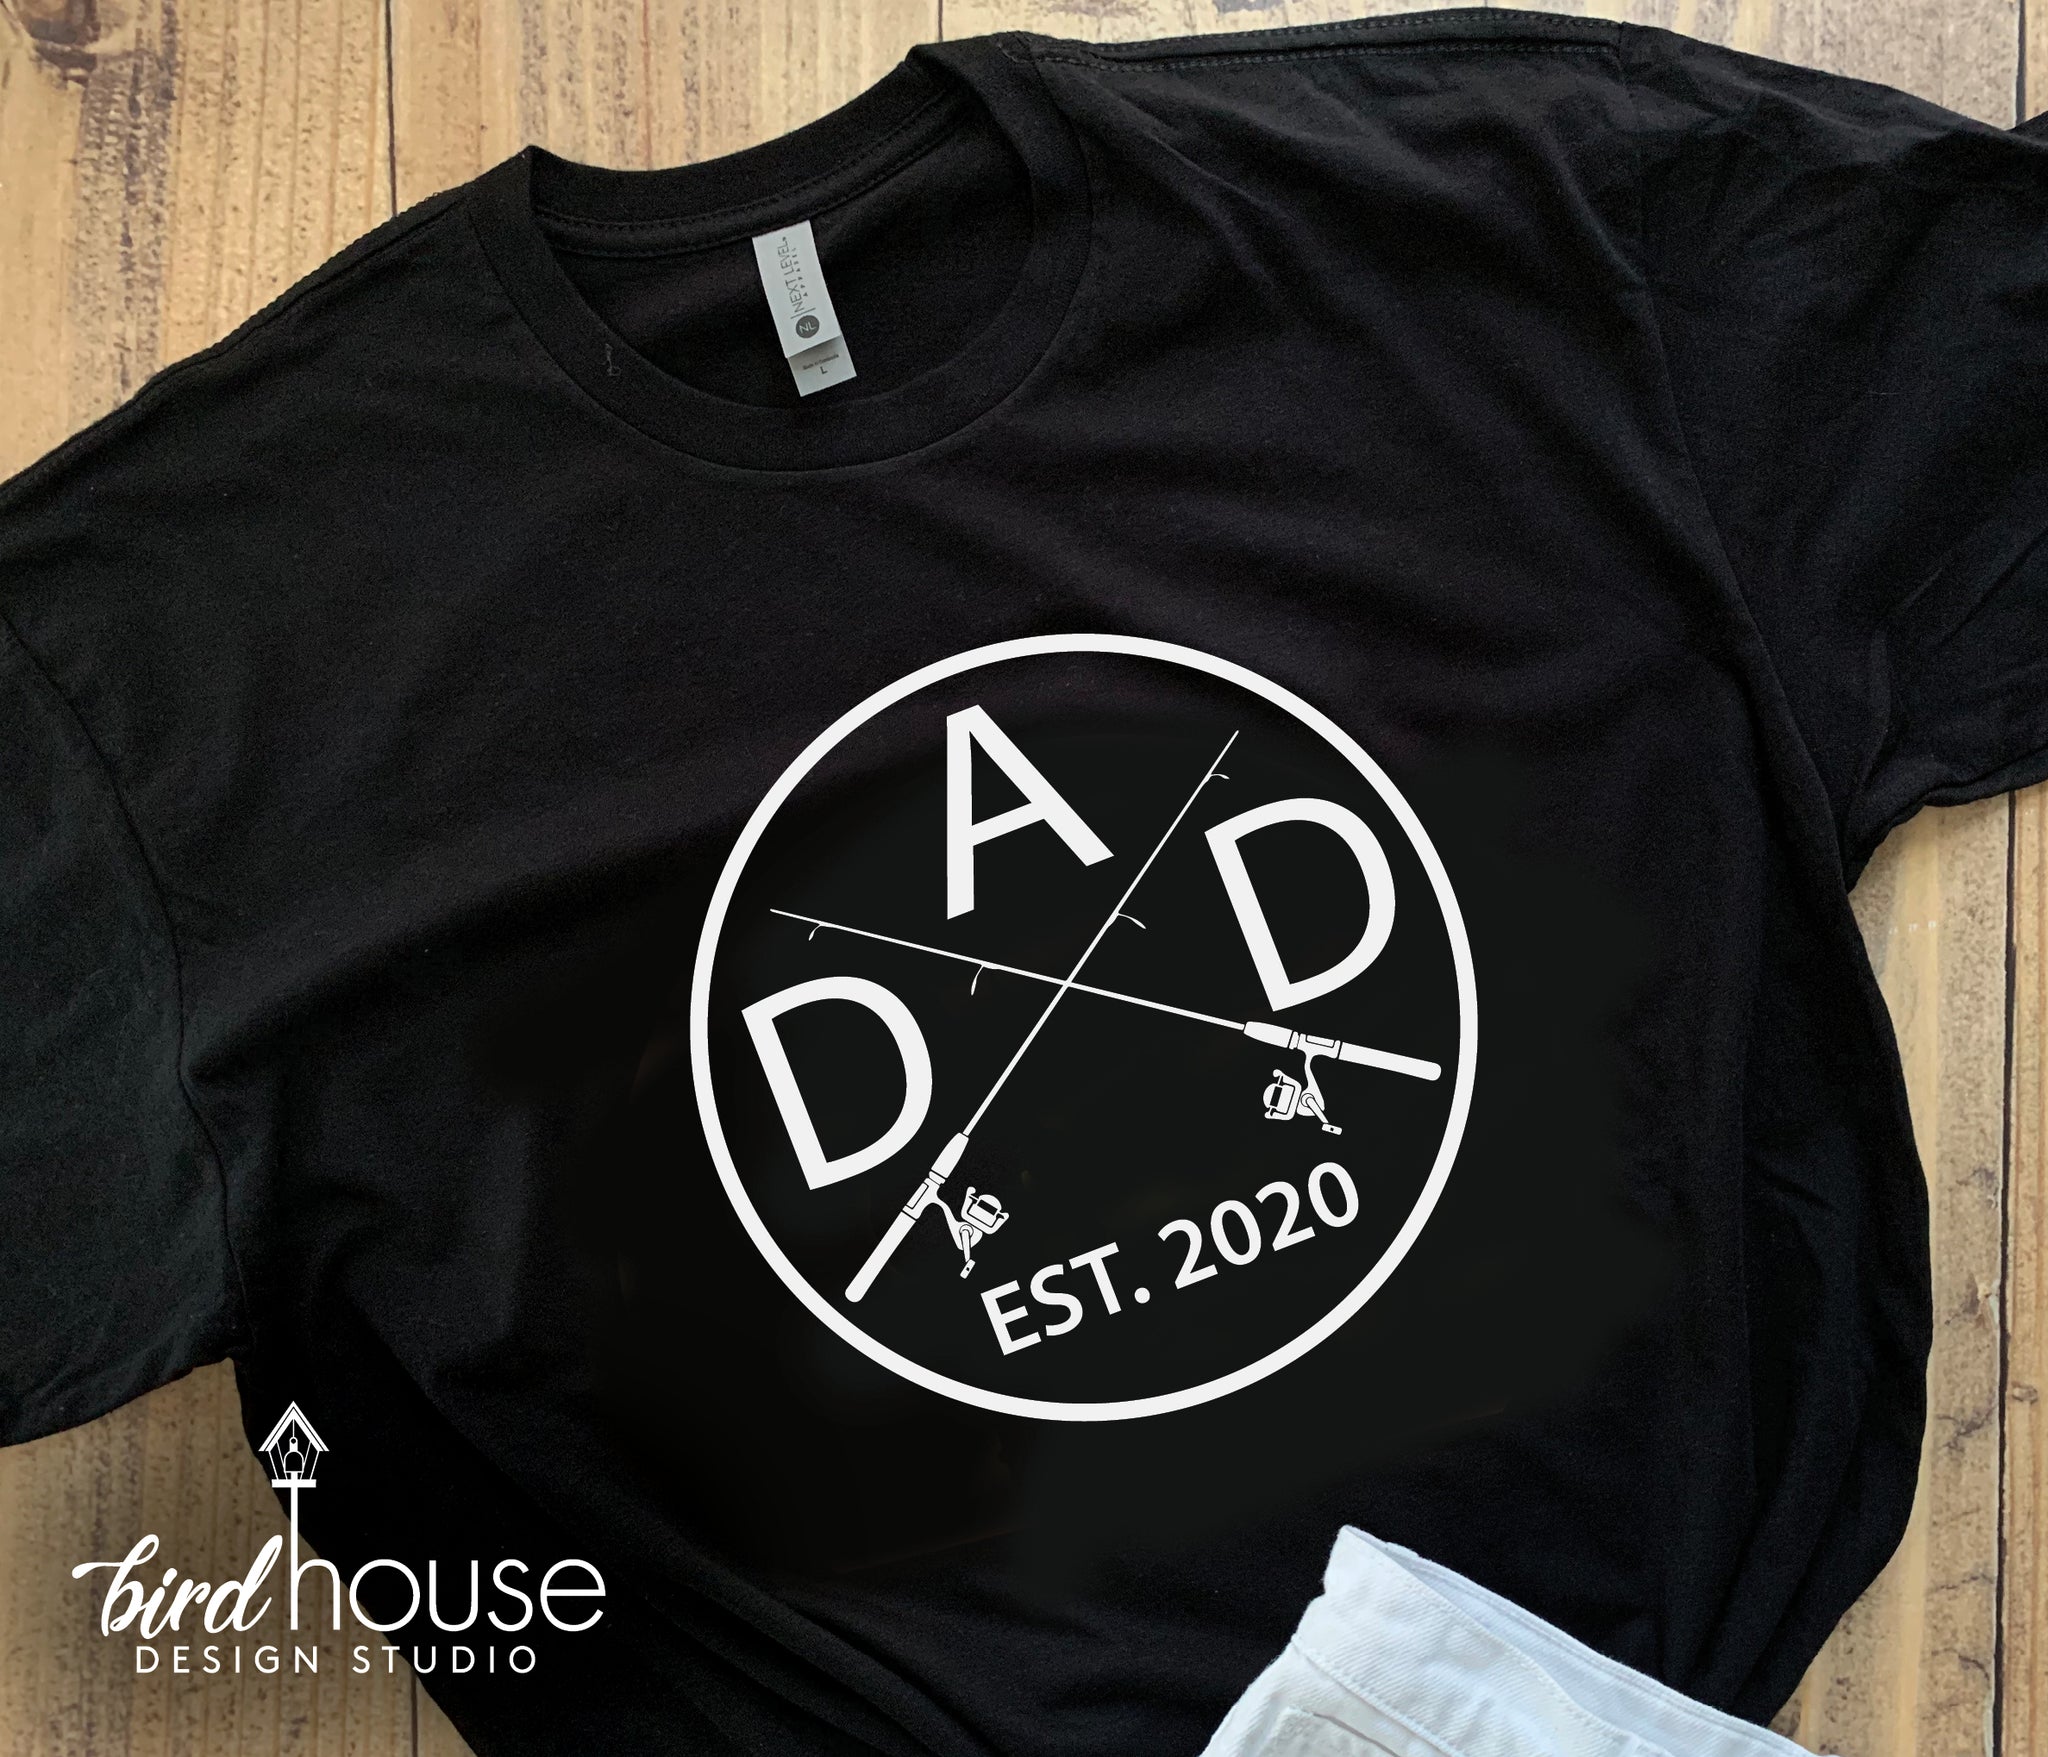 Dad Fishing Shirt, Cute Shirt For Pop, Papa, Any Color, Gift for